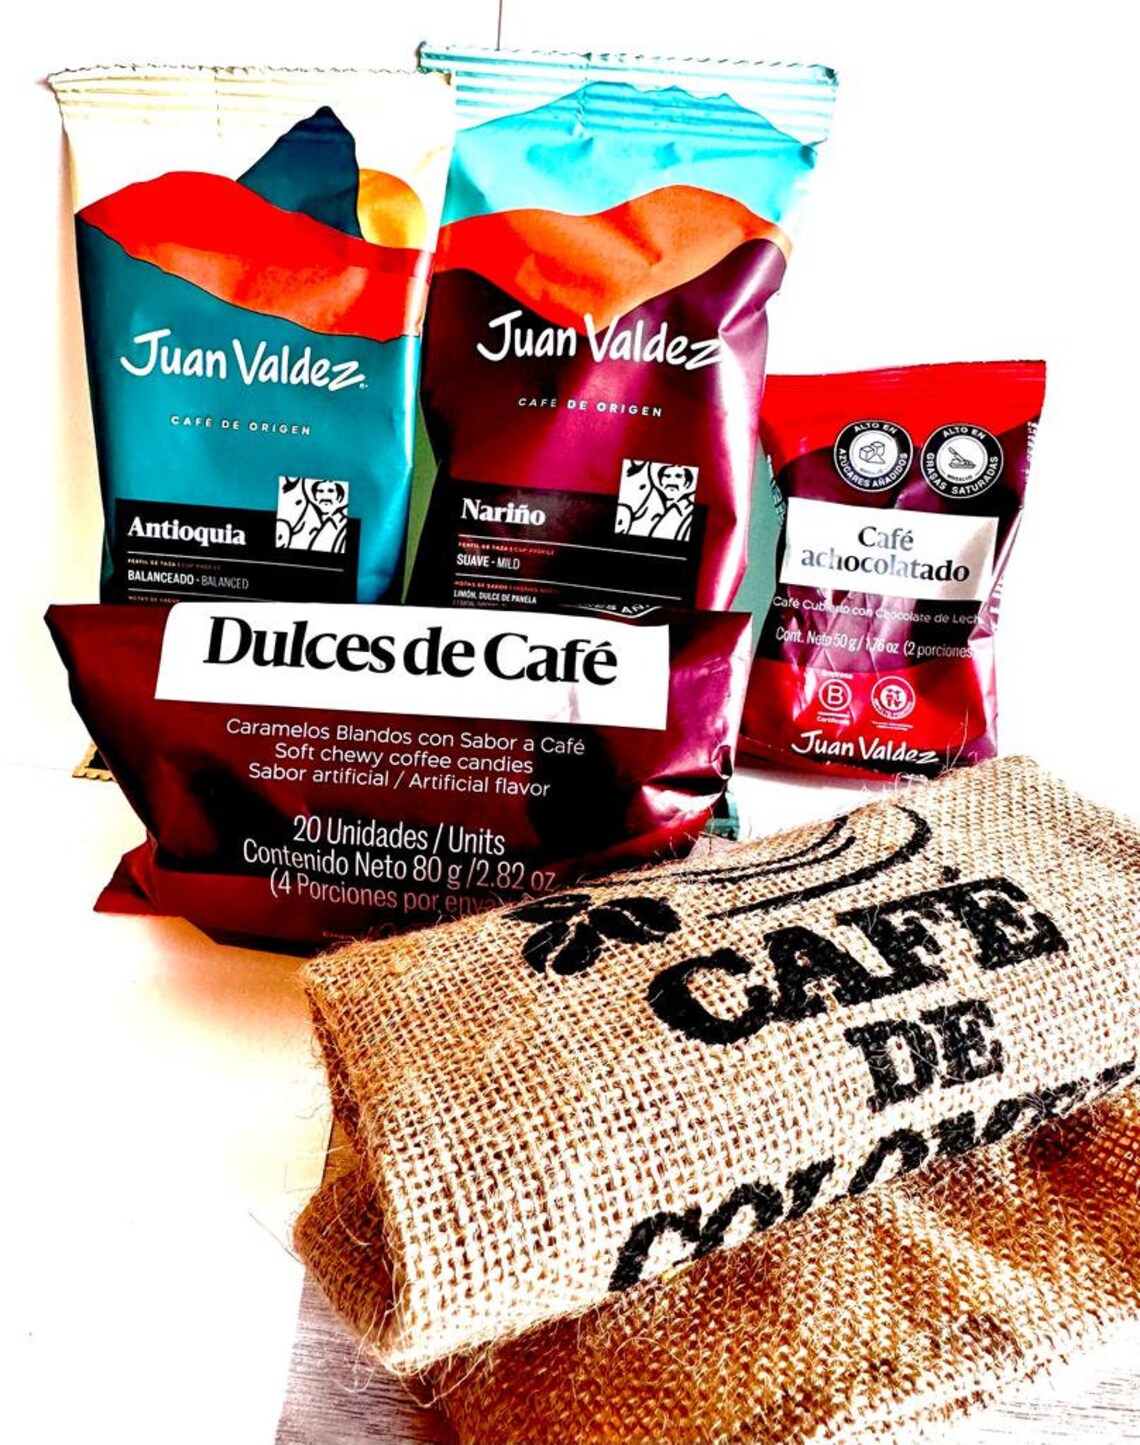 Coffee Gift Set from Colombia. Juan Valdez. 4 Samplers: 2 Ground Coffee Flavors